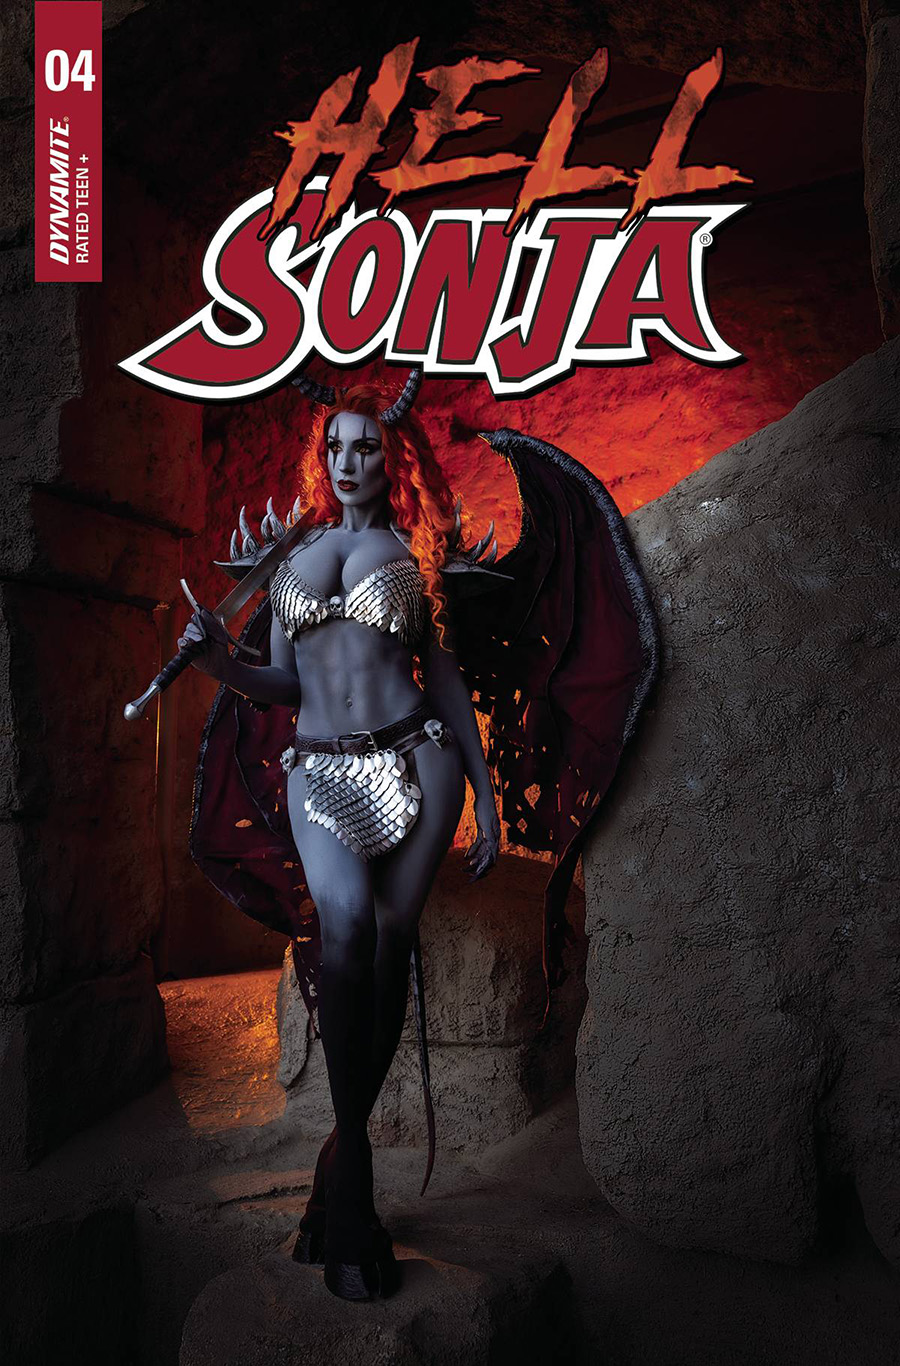 Hell Sonja #4 Cover E Variant Gracie The Cosplay Lass Cosplay Photo Cover